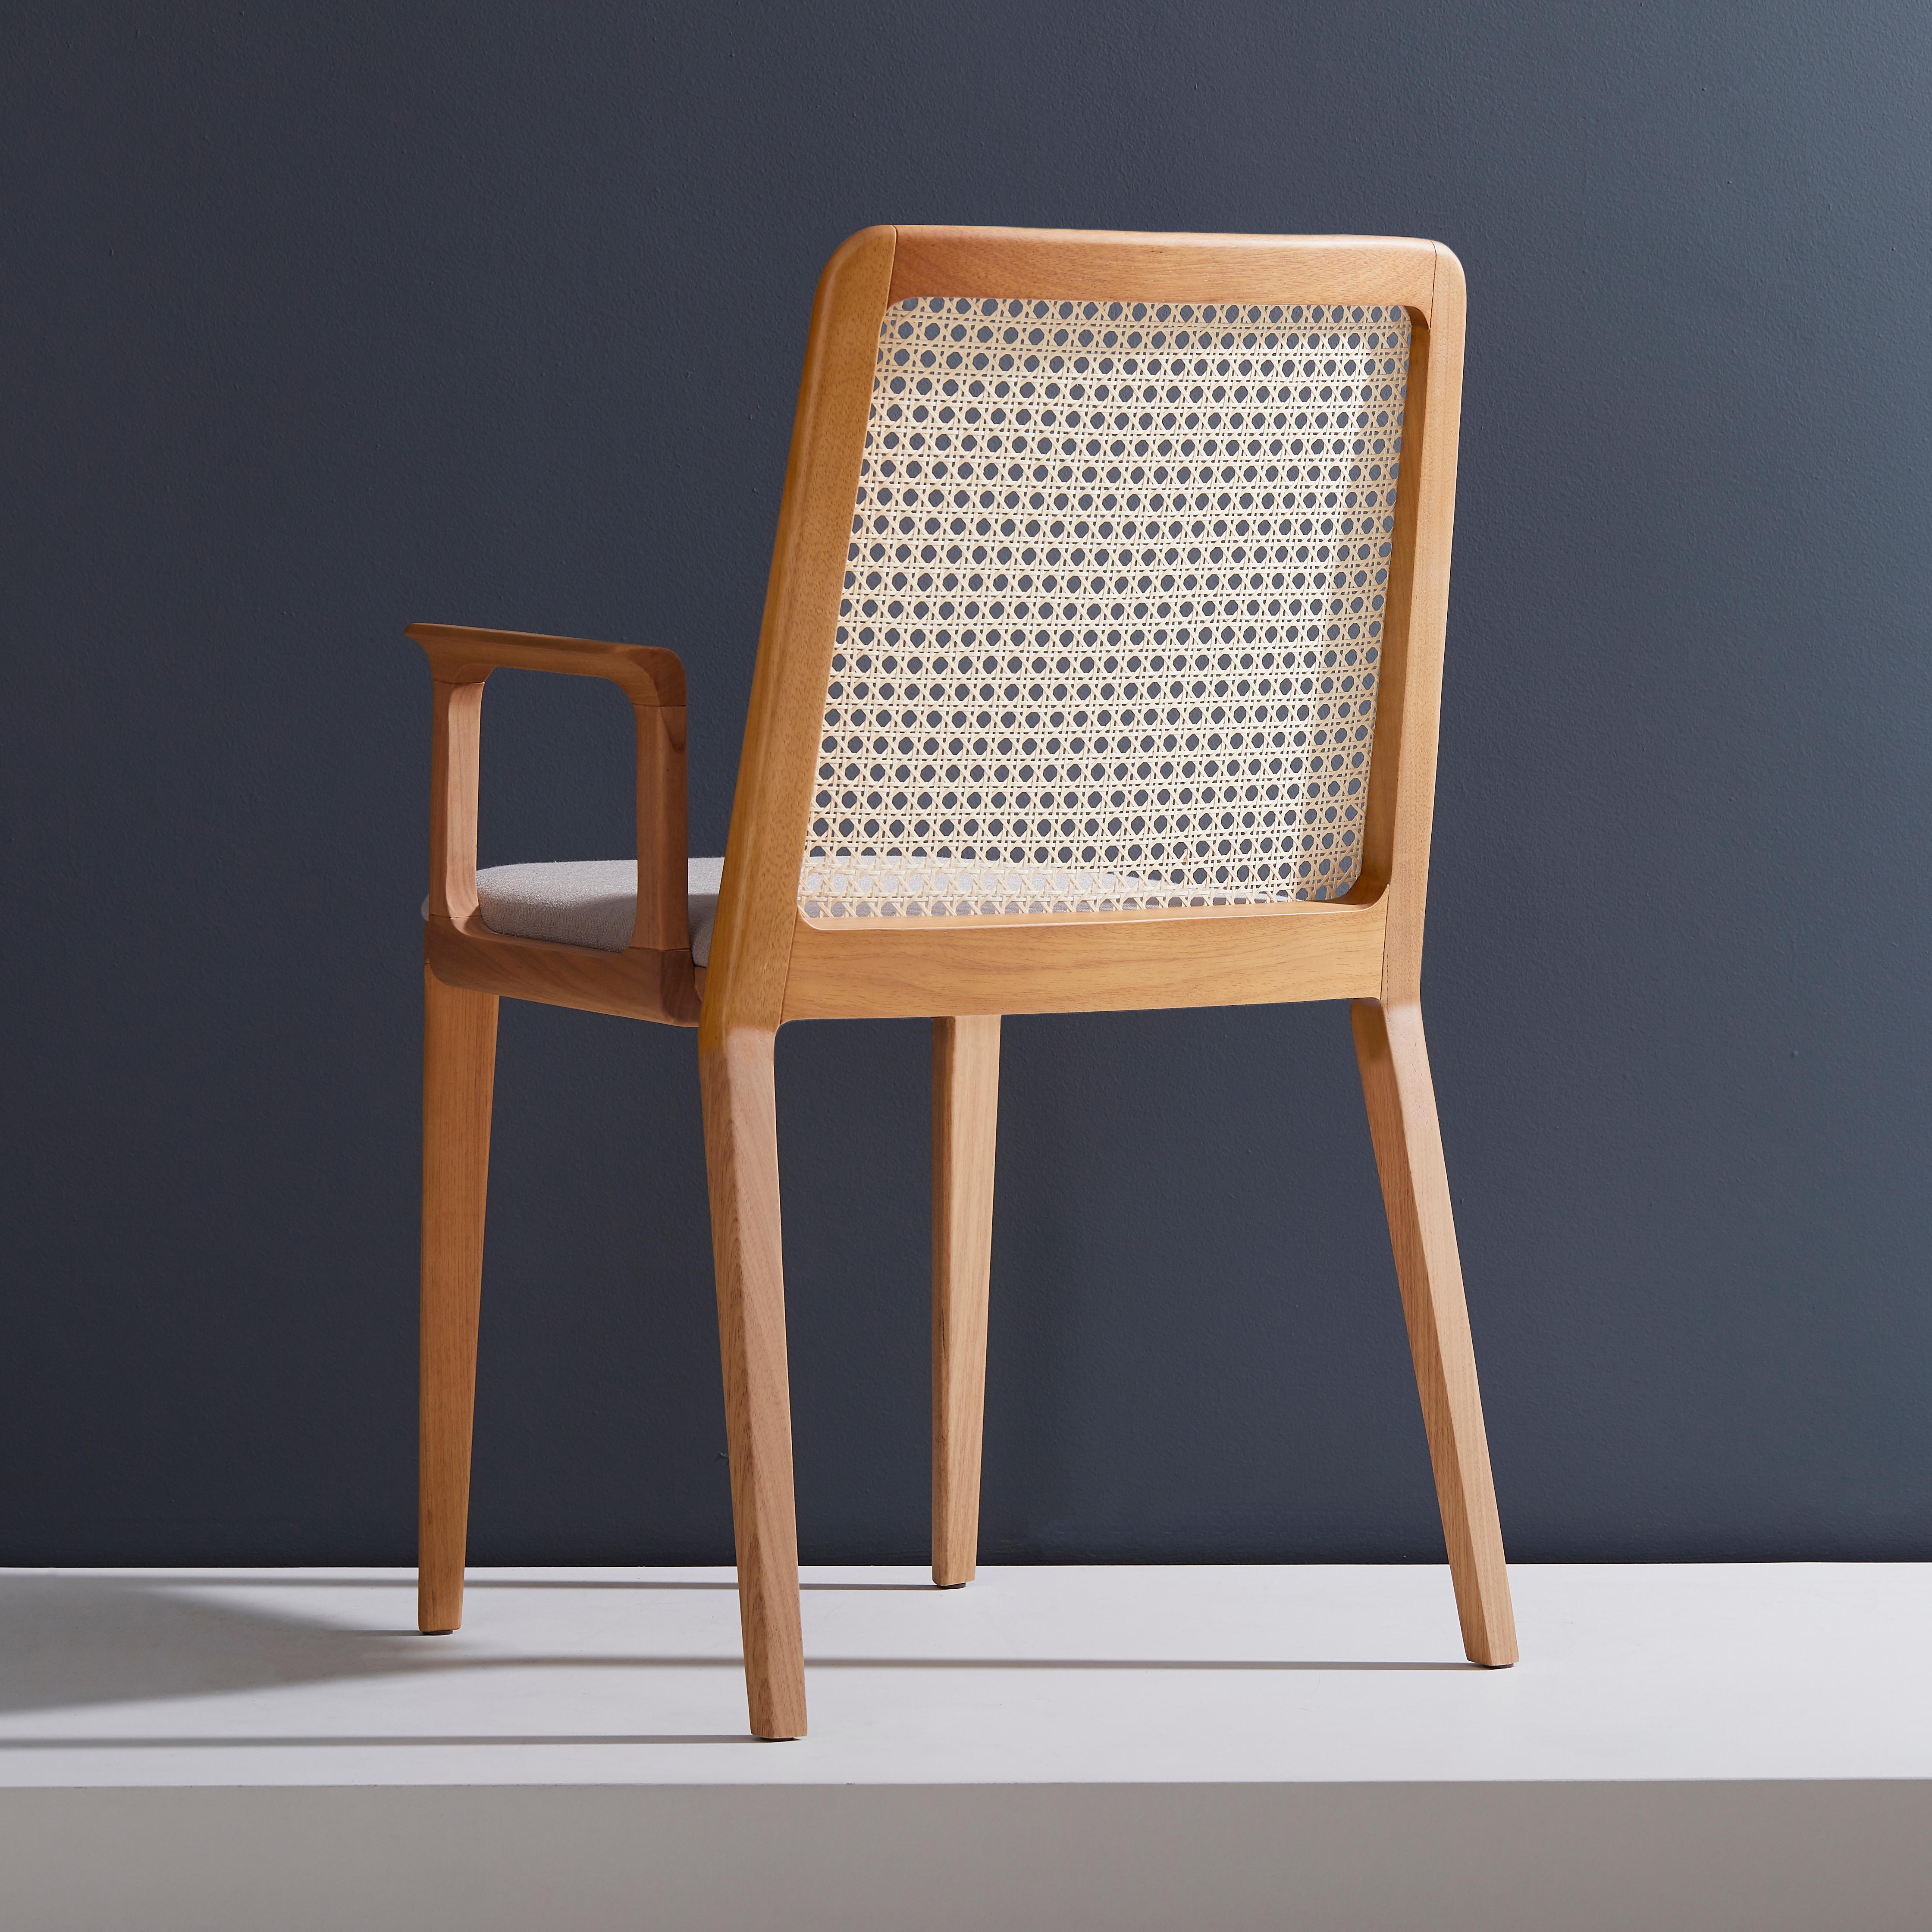 Brazilian Minimal Style, Solid Wood Chair, Textile Seating, Solid Backboard, with Arms For Sale